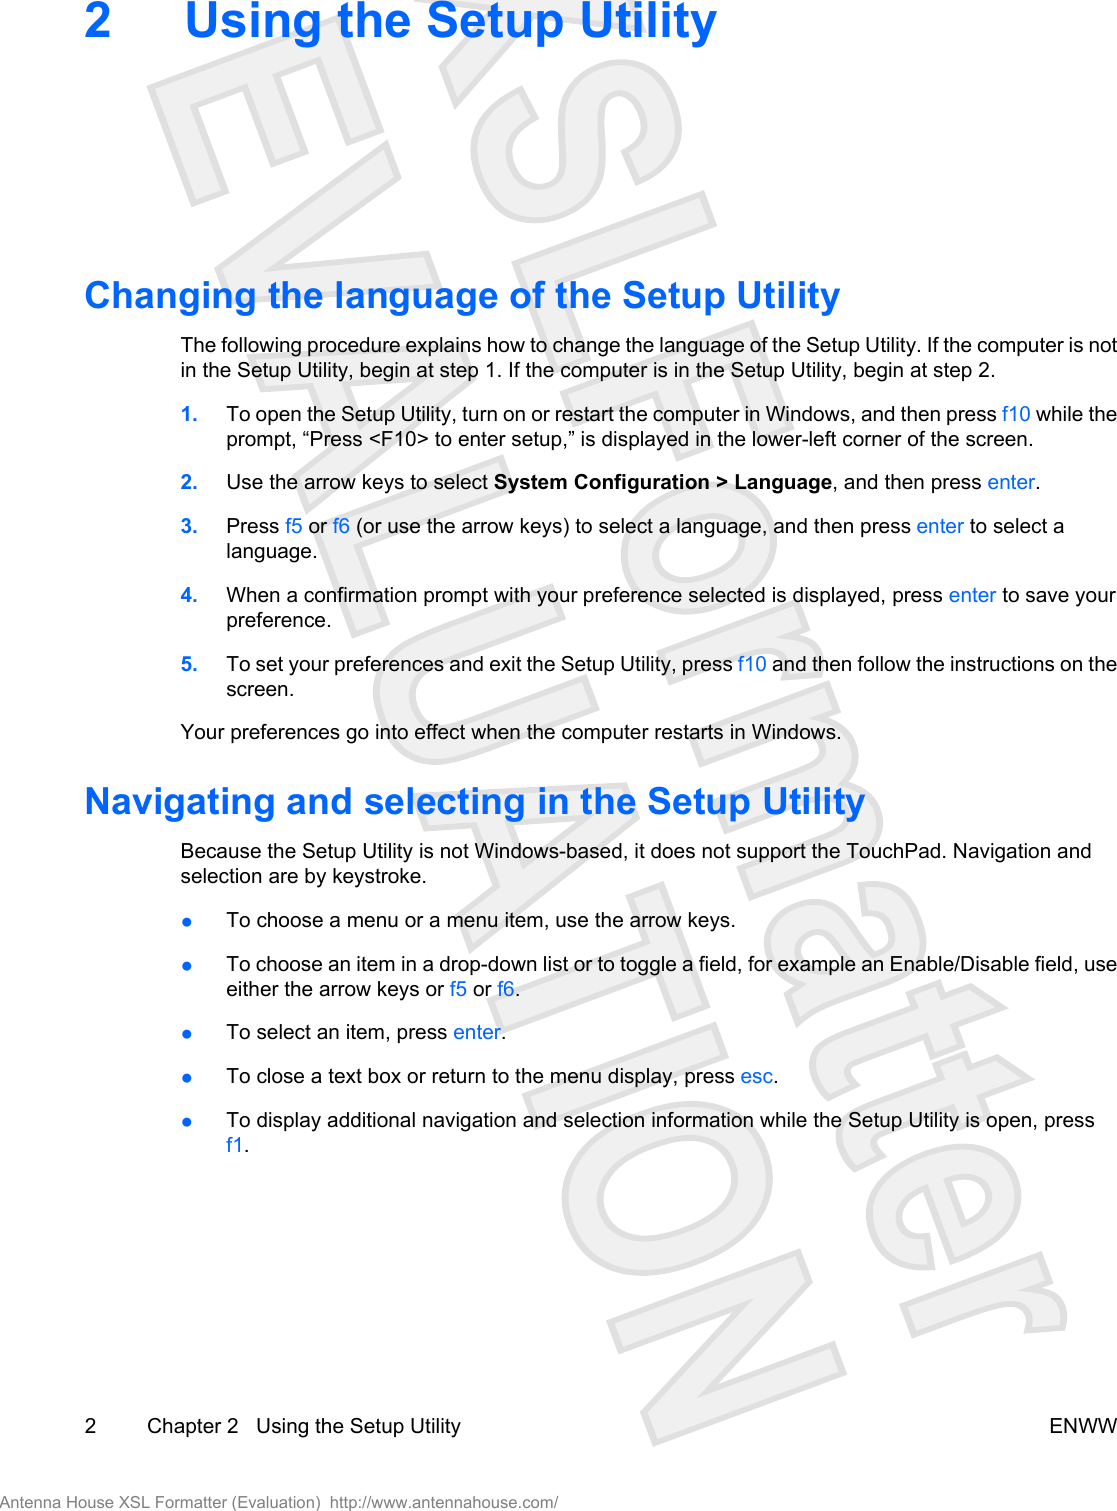 2 Using the Setup UtilityChanging the language of the Setup UtilityThe following procedure explains how to change the language of the Setup Utility. If the computer is notin the Setup Utility, begin at step 1. If the computer is in the Setup Utility, begin at step 2.1. To open the Setup Utility, turn on or restart the computer in Windows, and then press f10 while theprompt, “Press &lt;F10&gt; to enter setup,” is displayed in the lower-left corner of the screen.2. Use the arrow keys to select System Configuration &gt; Language, and then press enter.3. Press f5 or f6 (or use the arrow keys) to select a language, and then press enter to select alanguage.4. When a confirmation prompt with your preference selected is displayed, press enter to save yourpreference.5. To set your preferences and exit the Setup Utility, press f10 and then follow the instructions on thescreen.Your preferences go into effect when the computer restarts in Windows.Navigating and selecting in the Setup UtilityBecause the Setup Utility is not Windows-based, it does not support the TouchPad. Navigation andselection are by keystroke.●To choose a menu or a menu item, use the arrow keys.●To choose an item in a drop-down list or to toggle a field, for example an Enable/Disable field, useeither the arrow keys or f5 or f6.●To select an item, press enter.●To close a text box or return to the menu display, press esc.●To display additional navigation and selection information while the Setup Utility is open, pressf1.2 Chapter 2   Using the Setup Utility ENWWAntenna House XSL Formatter (Evaluation)  http://www.antennahouse.com/